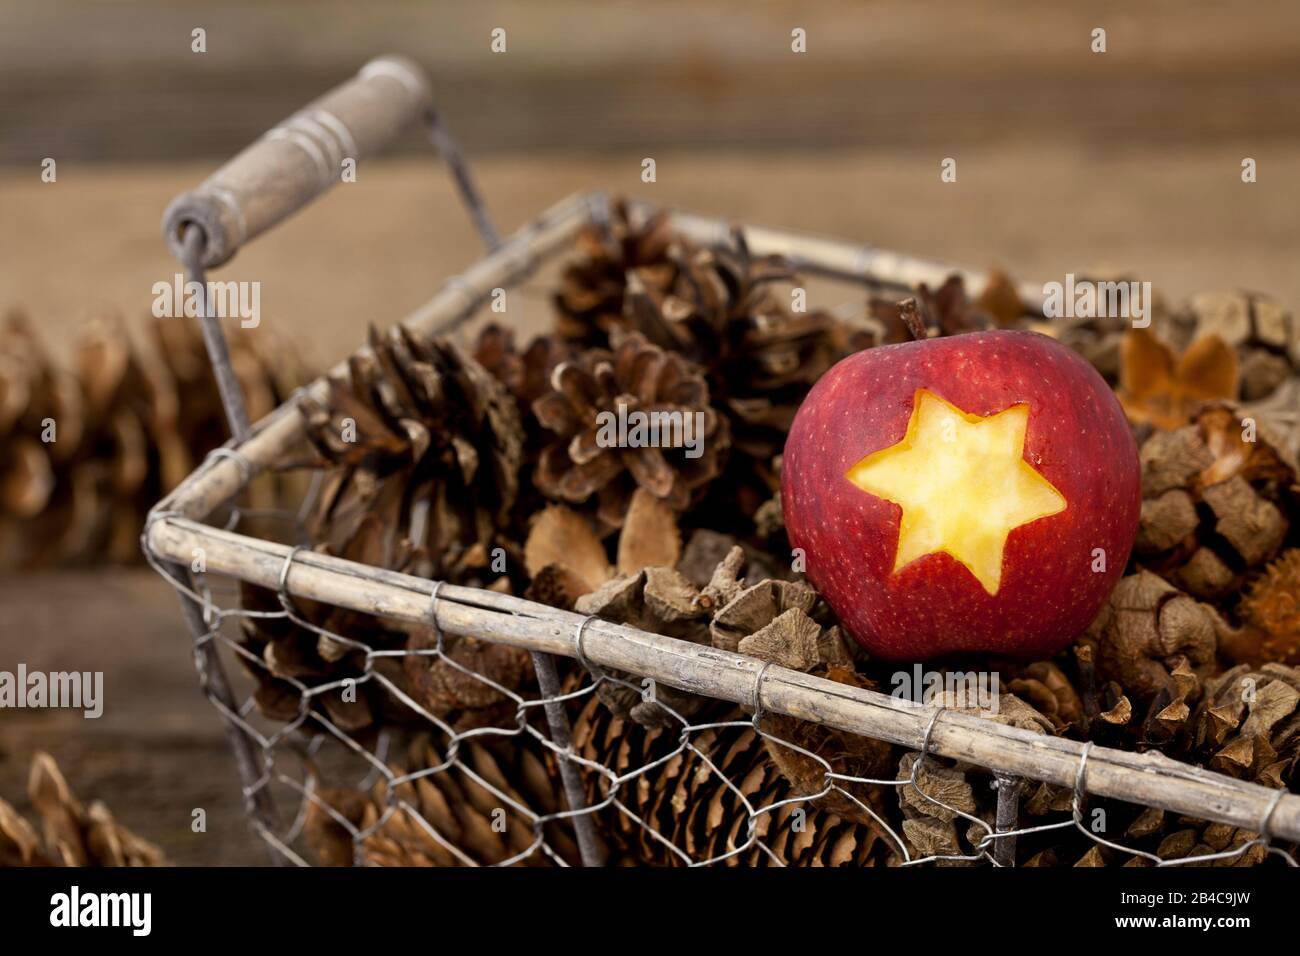 Red apple with a star shaped cut out in a basket with pine cones Stock Photo